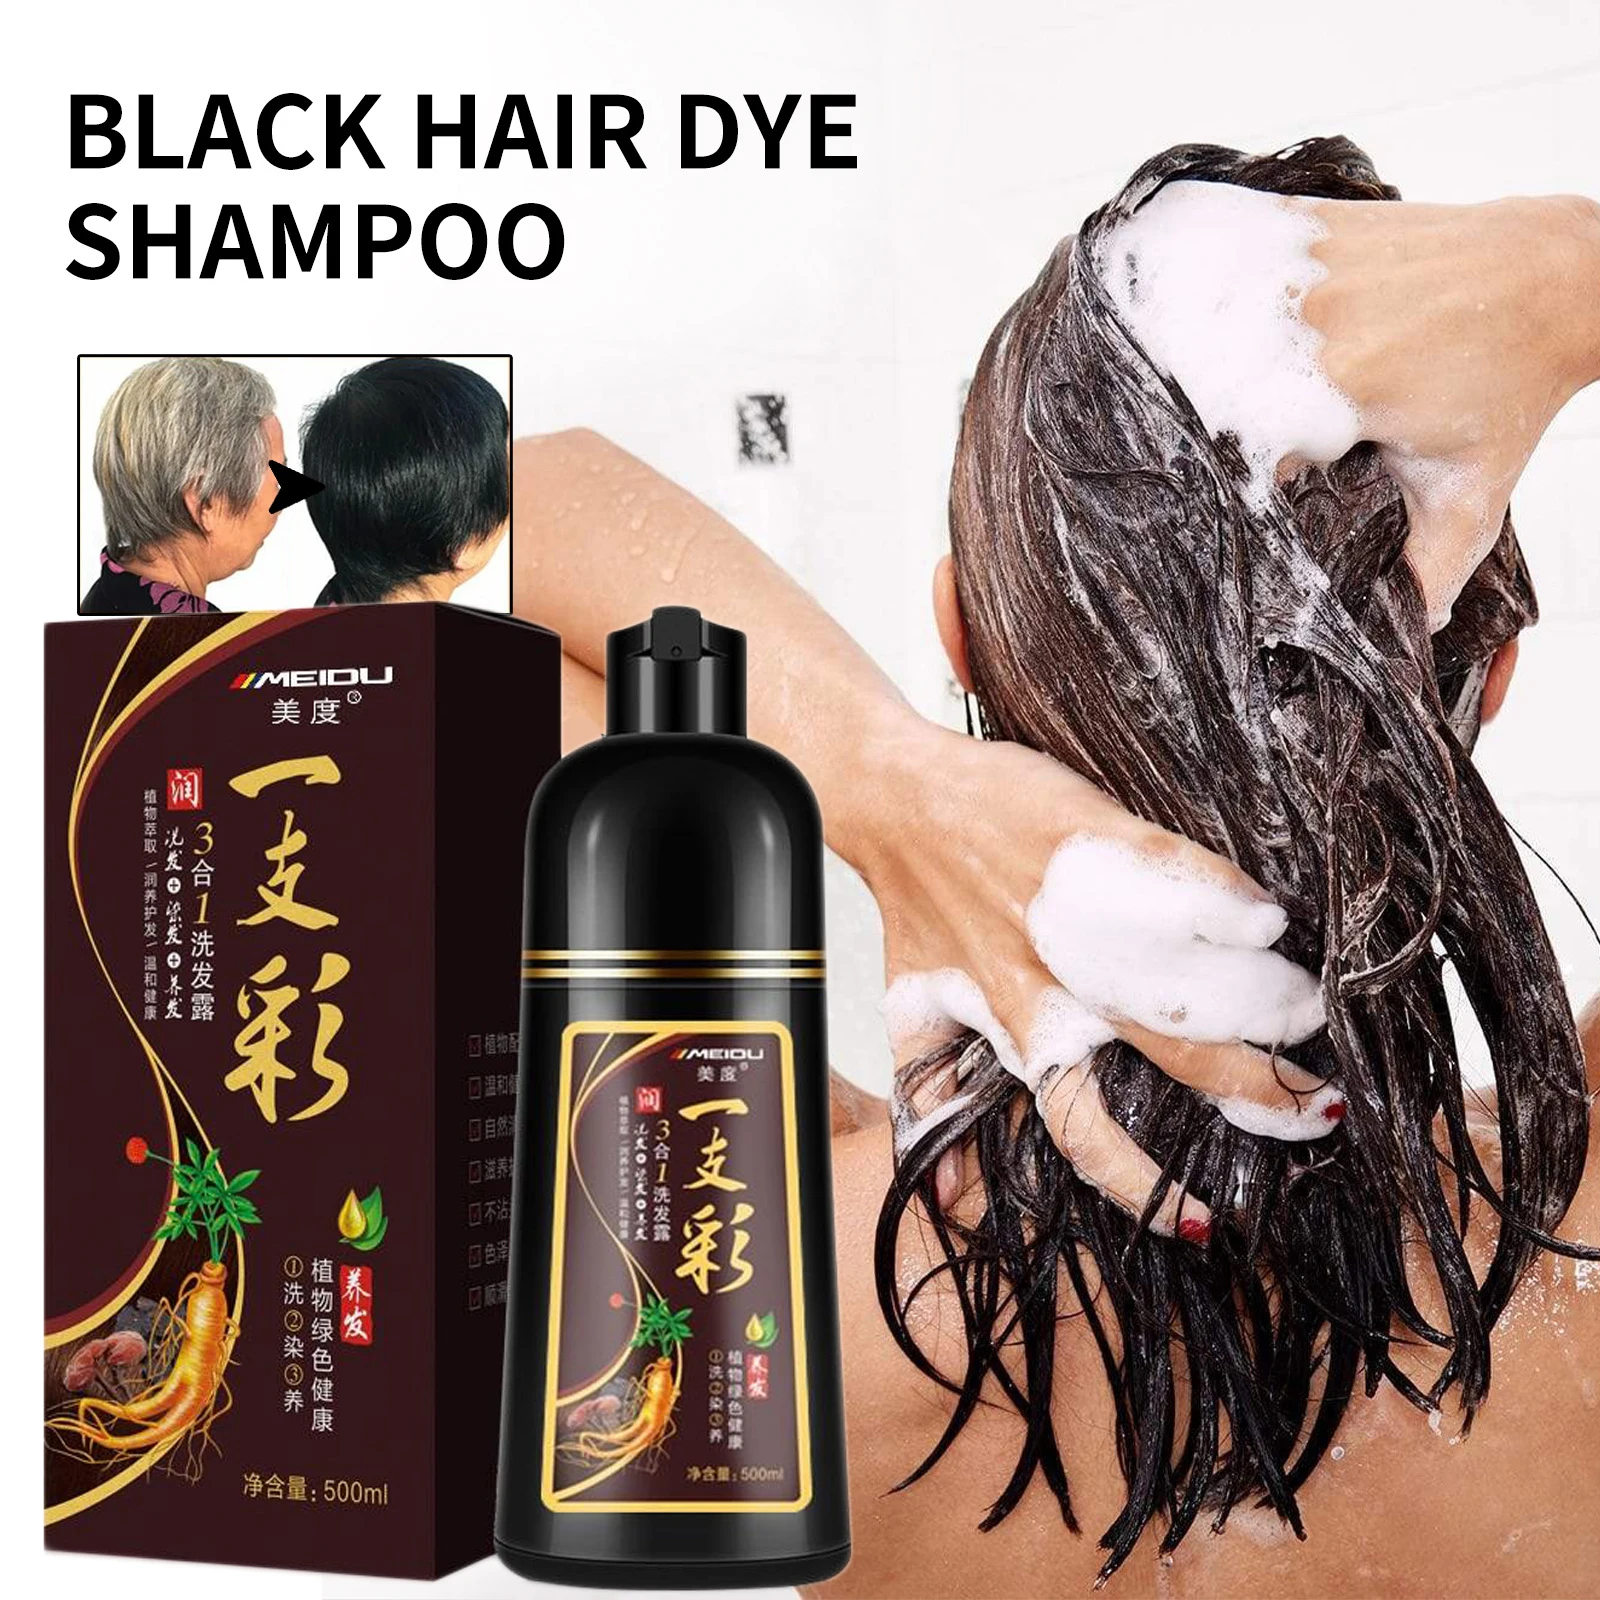 Meidu 500ml Organic Natural Black Hair Dye Only 5 Minutes Ginseng Extract Black  Hair Dye Shampoo For Cover Gray White Hair - Hair Color - AliExpress